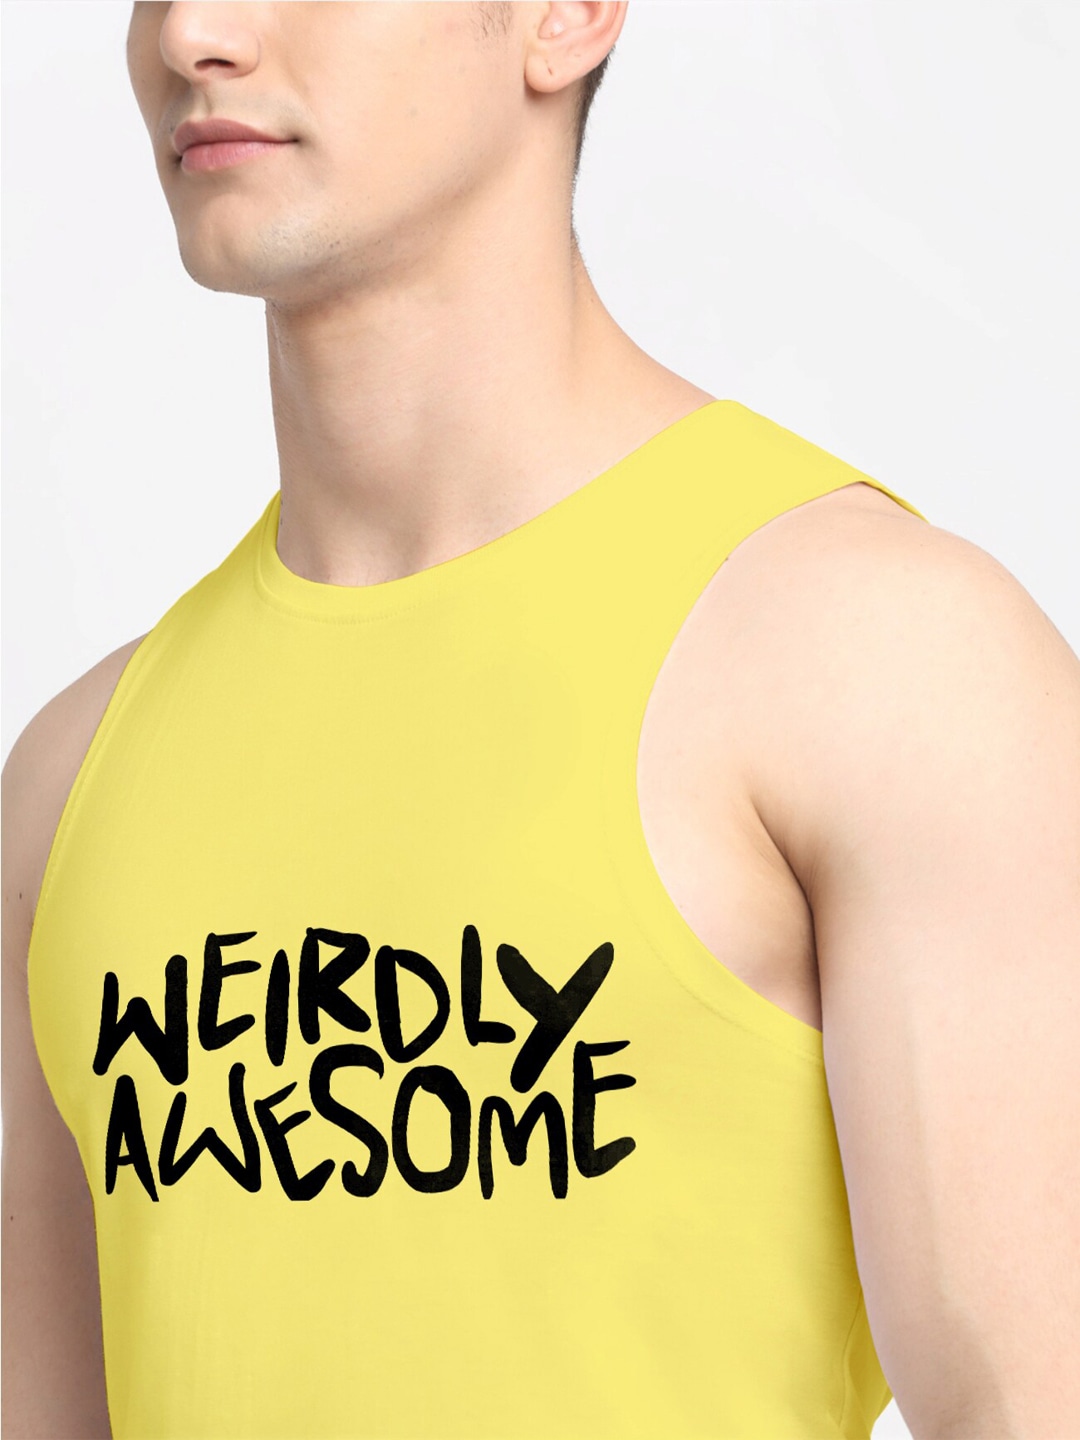 Clothing Innerwear Vests | Friskers Men Yellow & Black Printed Pure Cotton Gym Vest - BH64741